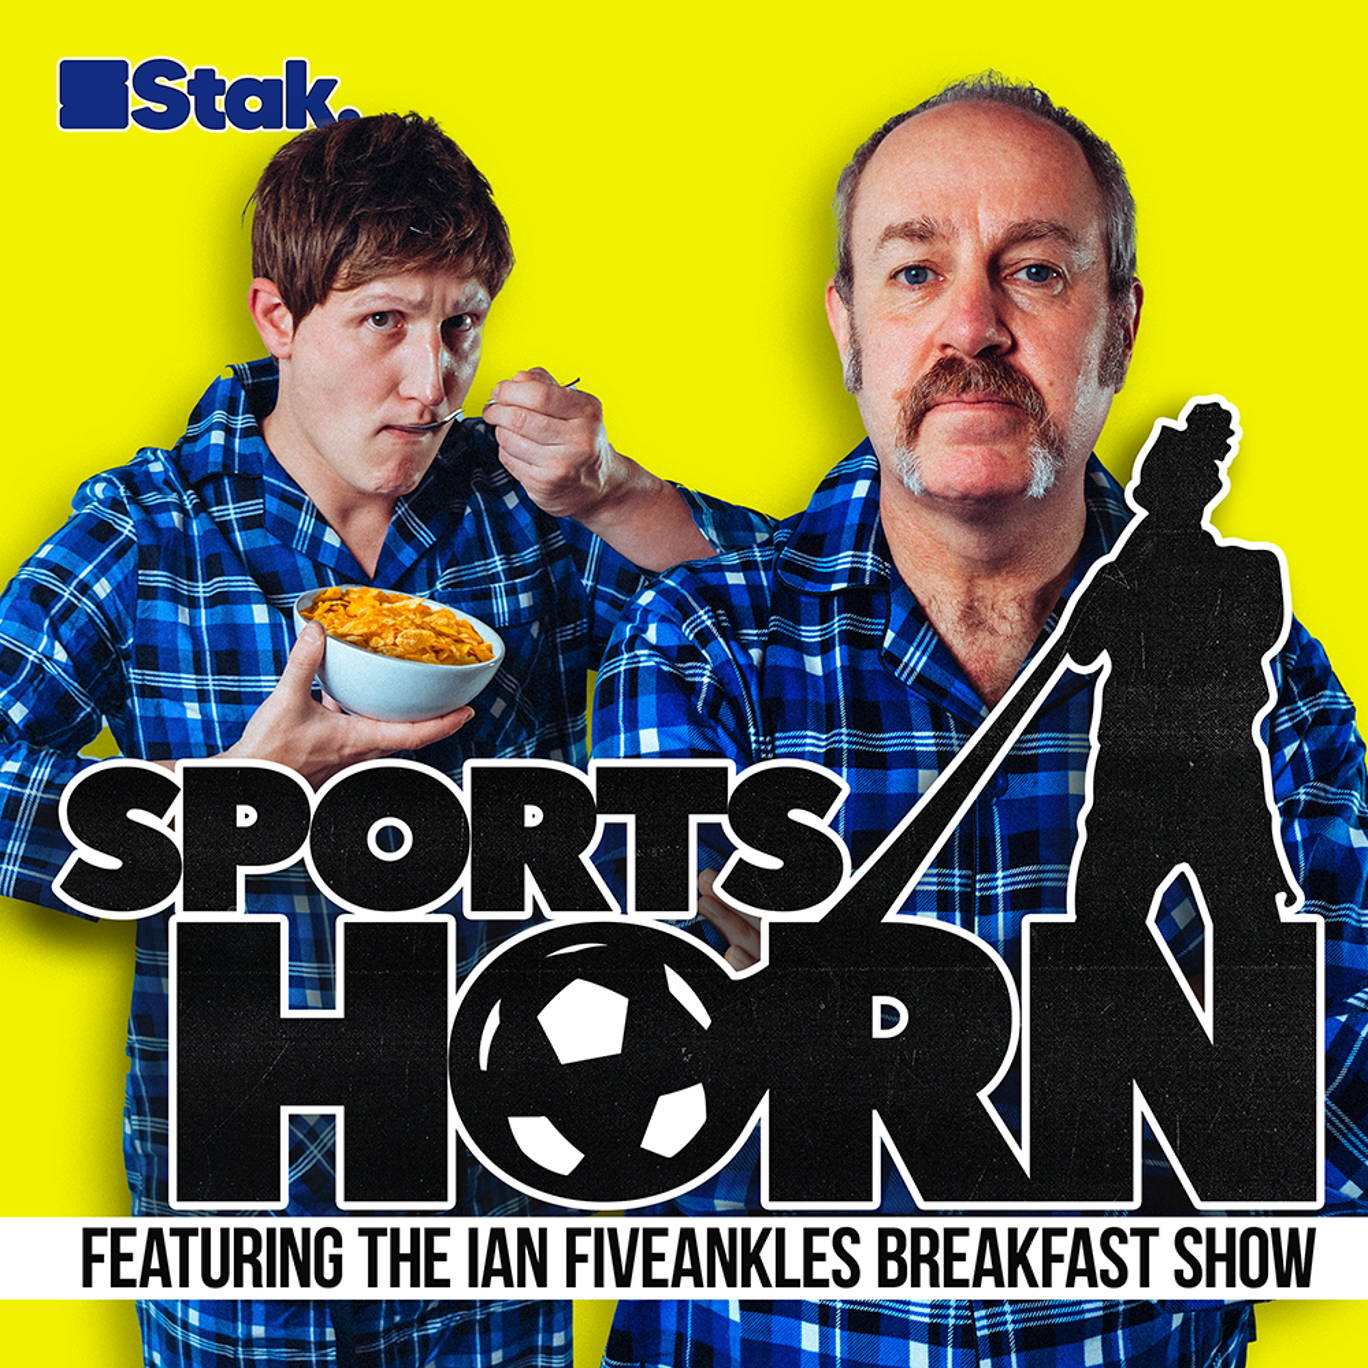 The artwork for the Sports Horn podcast.